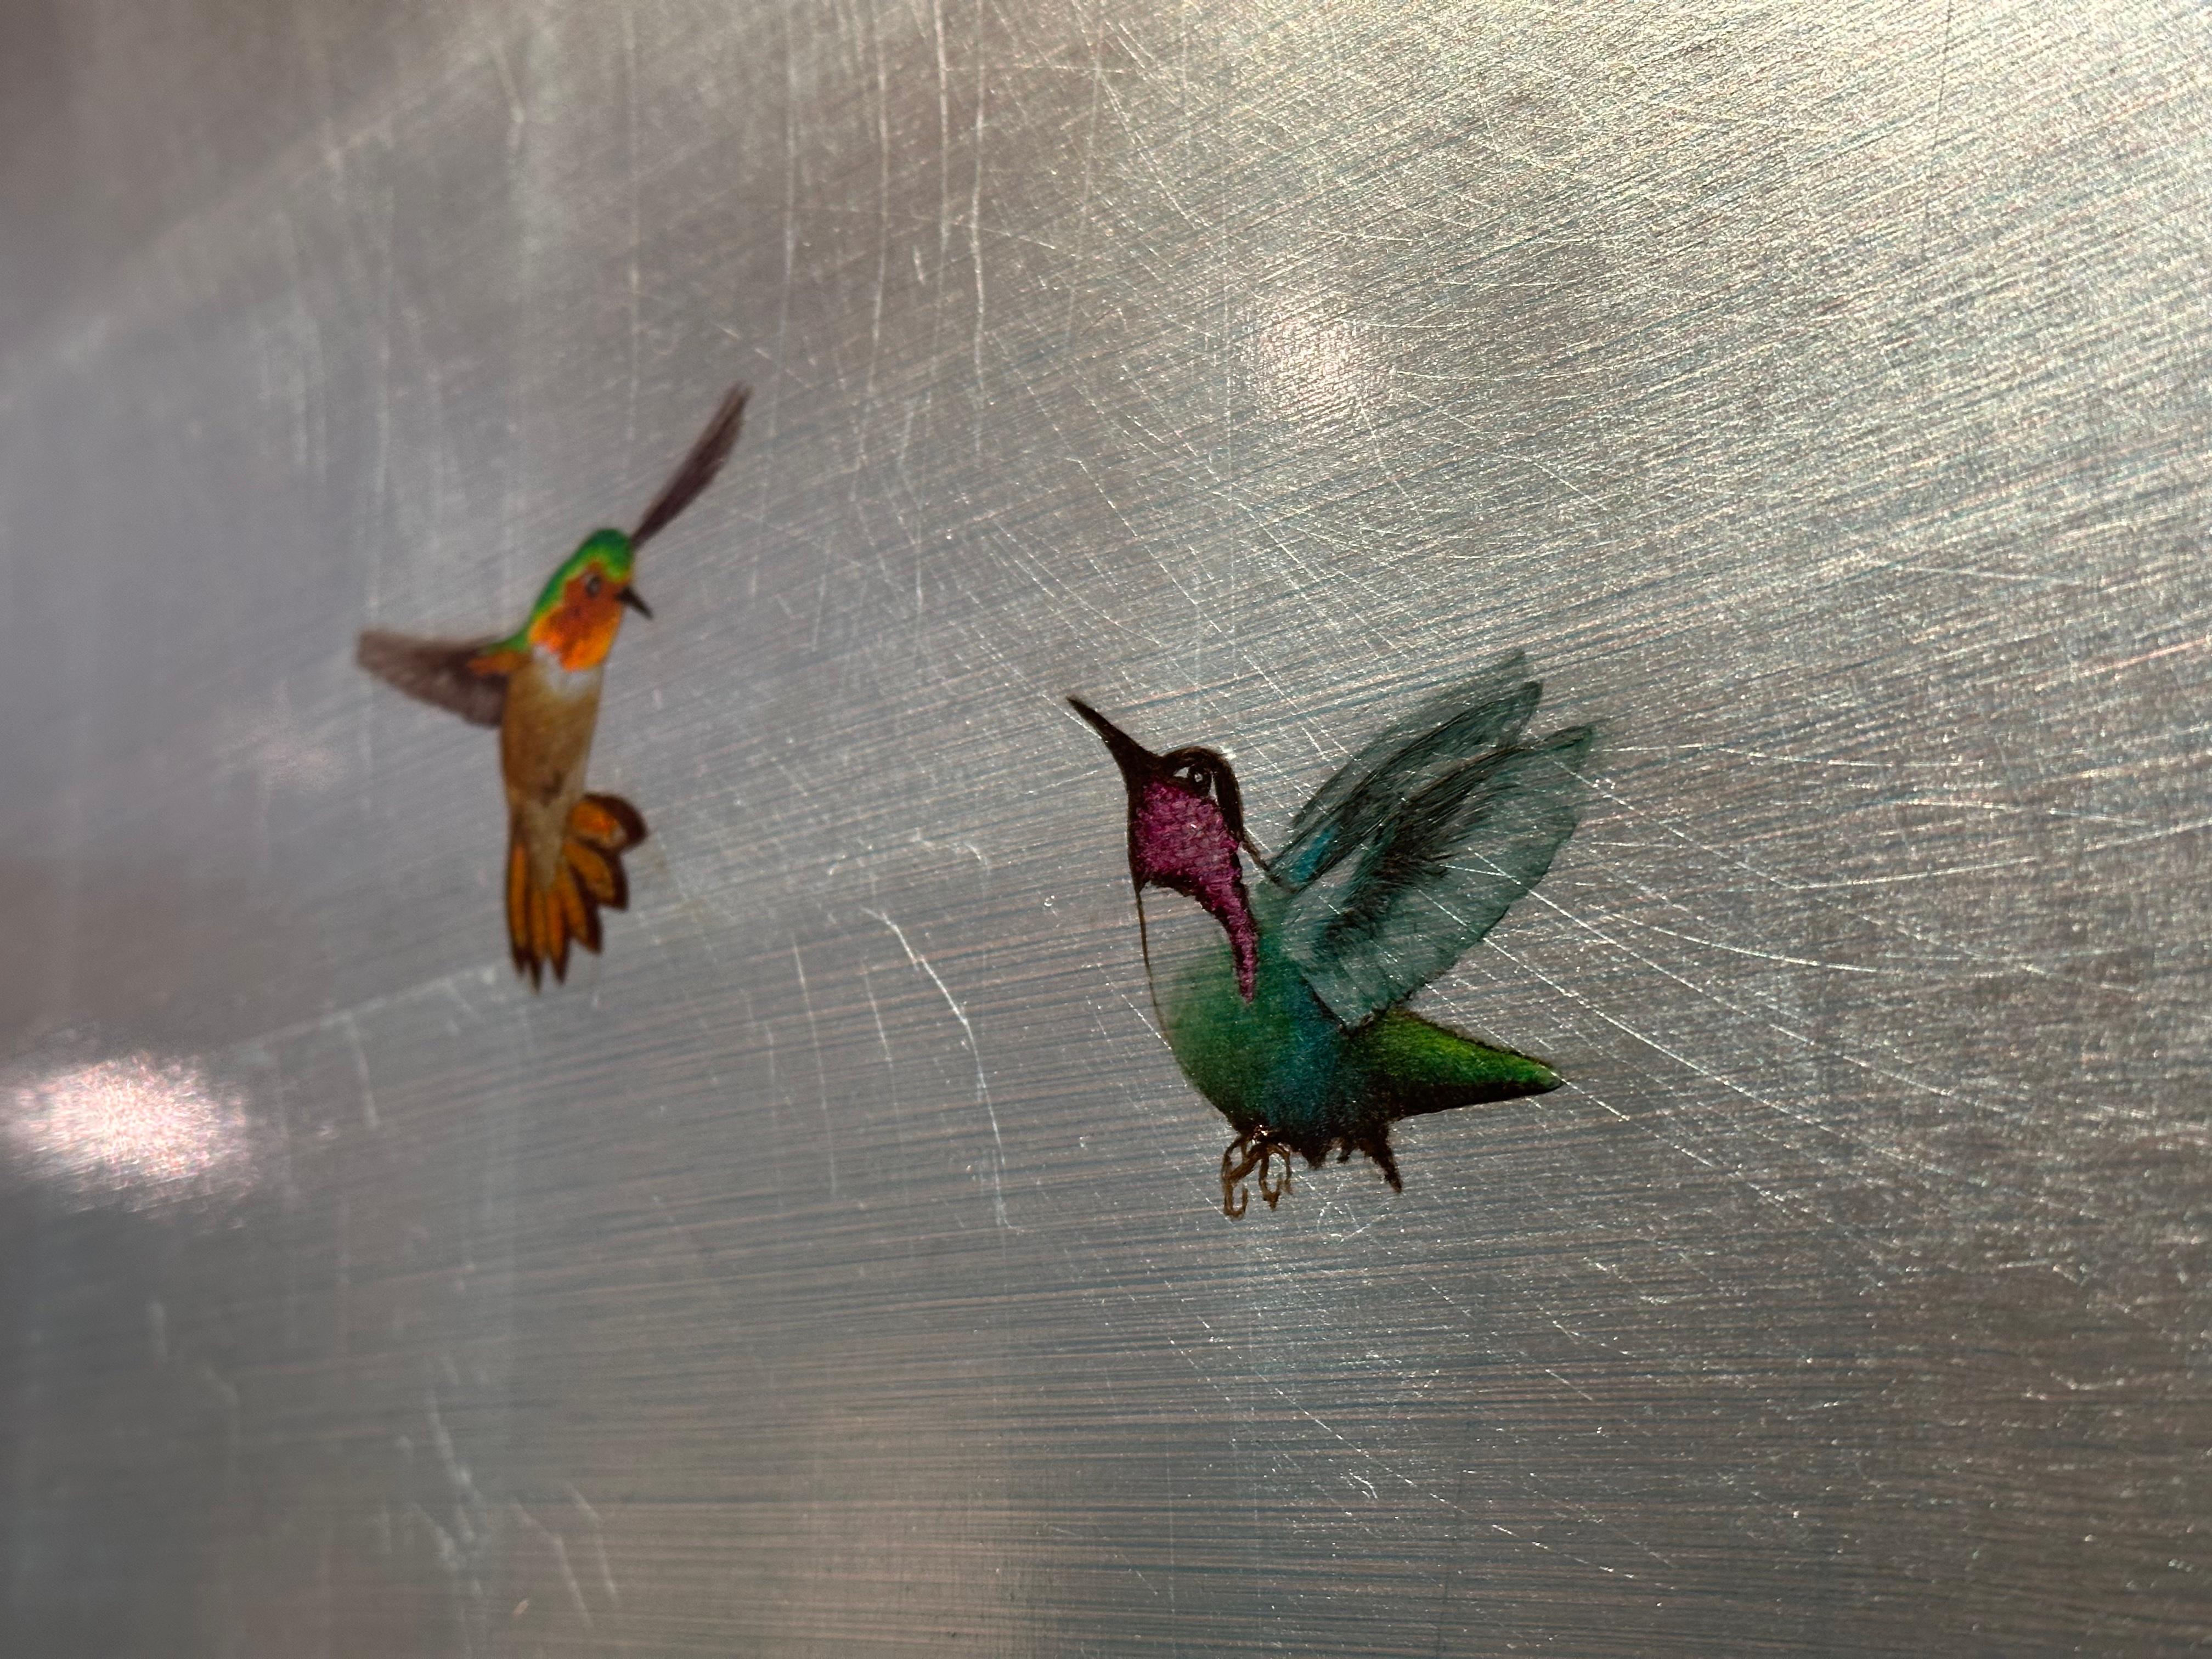 A wonderful composition of one of Reynolds’ most iconic subjects, hummingbirds. This piece depicts two multicolored hummingbirds mid-flight over a teal and silver reflecting pond. The deep green reeds add wonderful movement and contrast to the